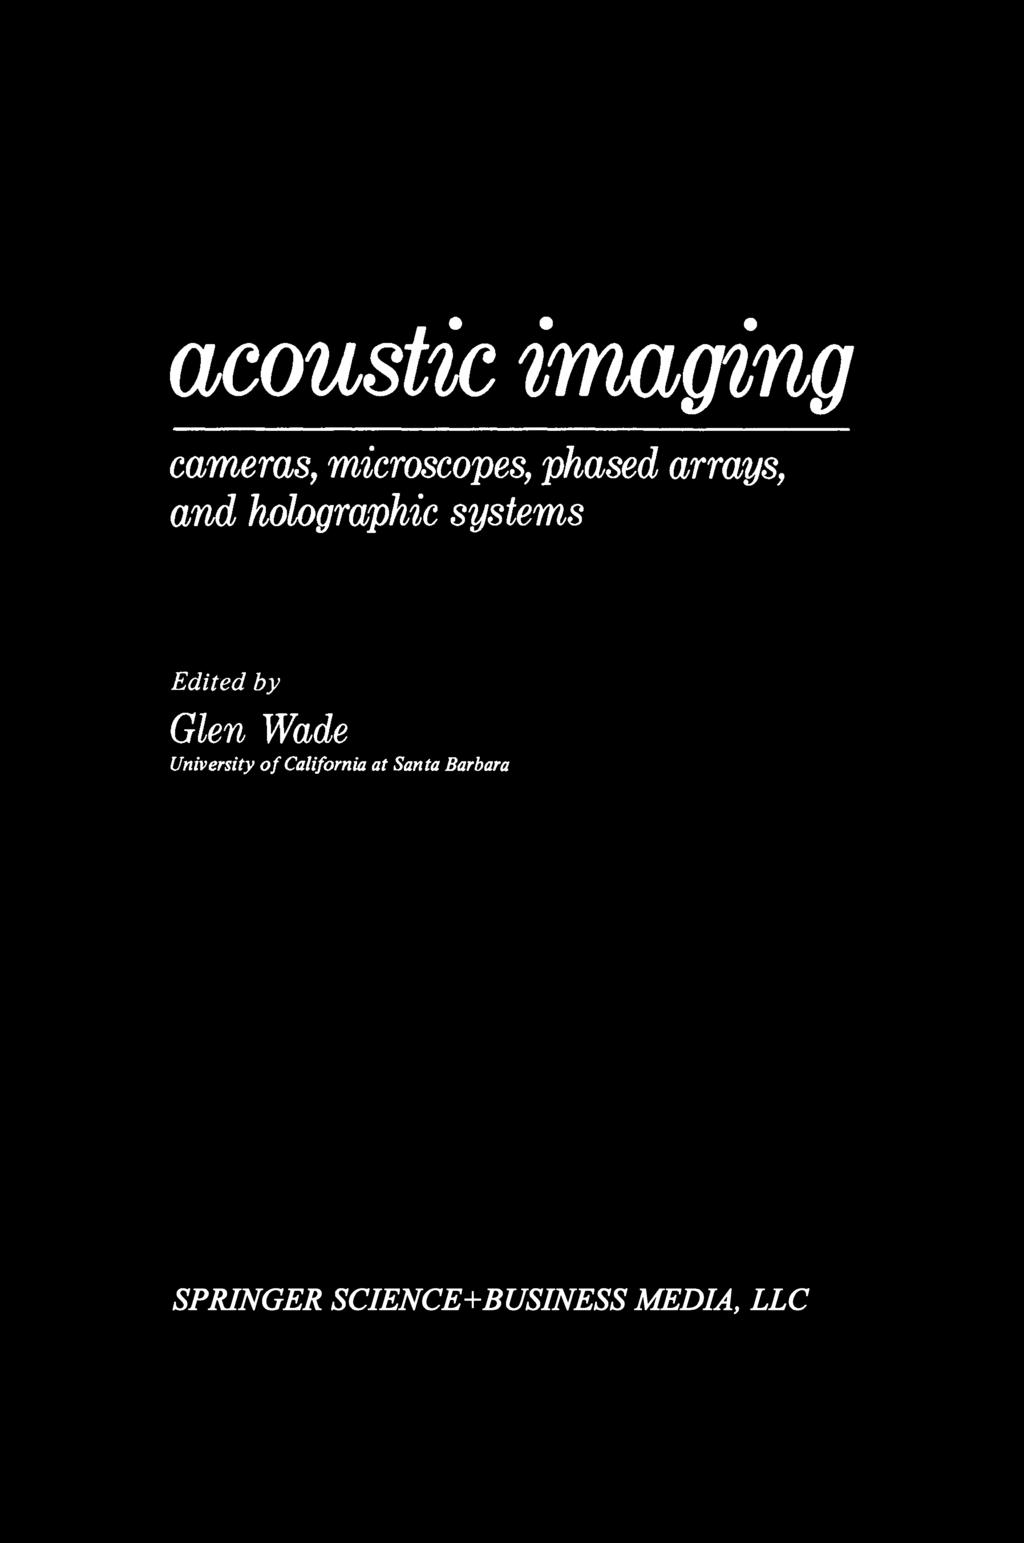 acoustic imaging cameras, microscopes, phased arrays, and holographic systems Edited by